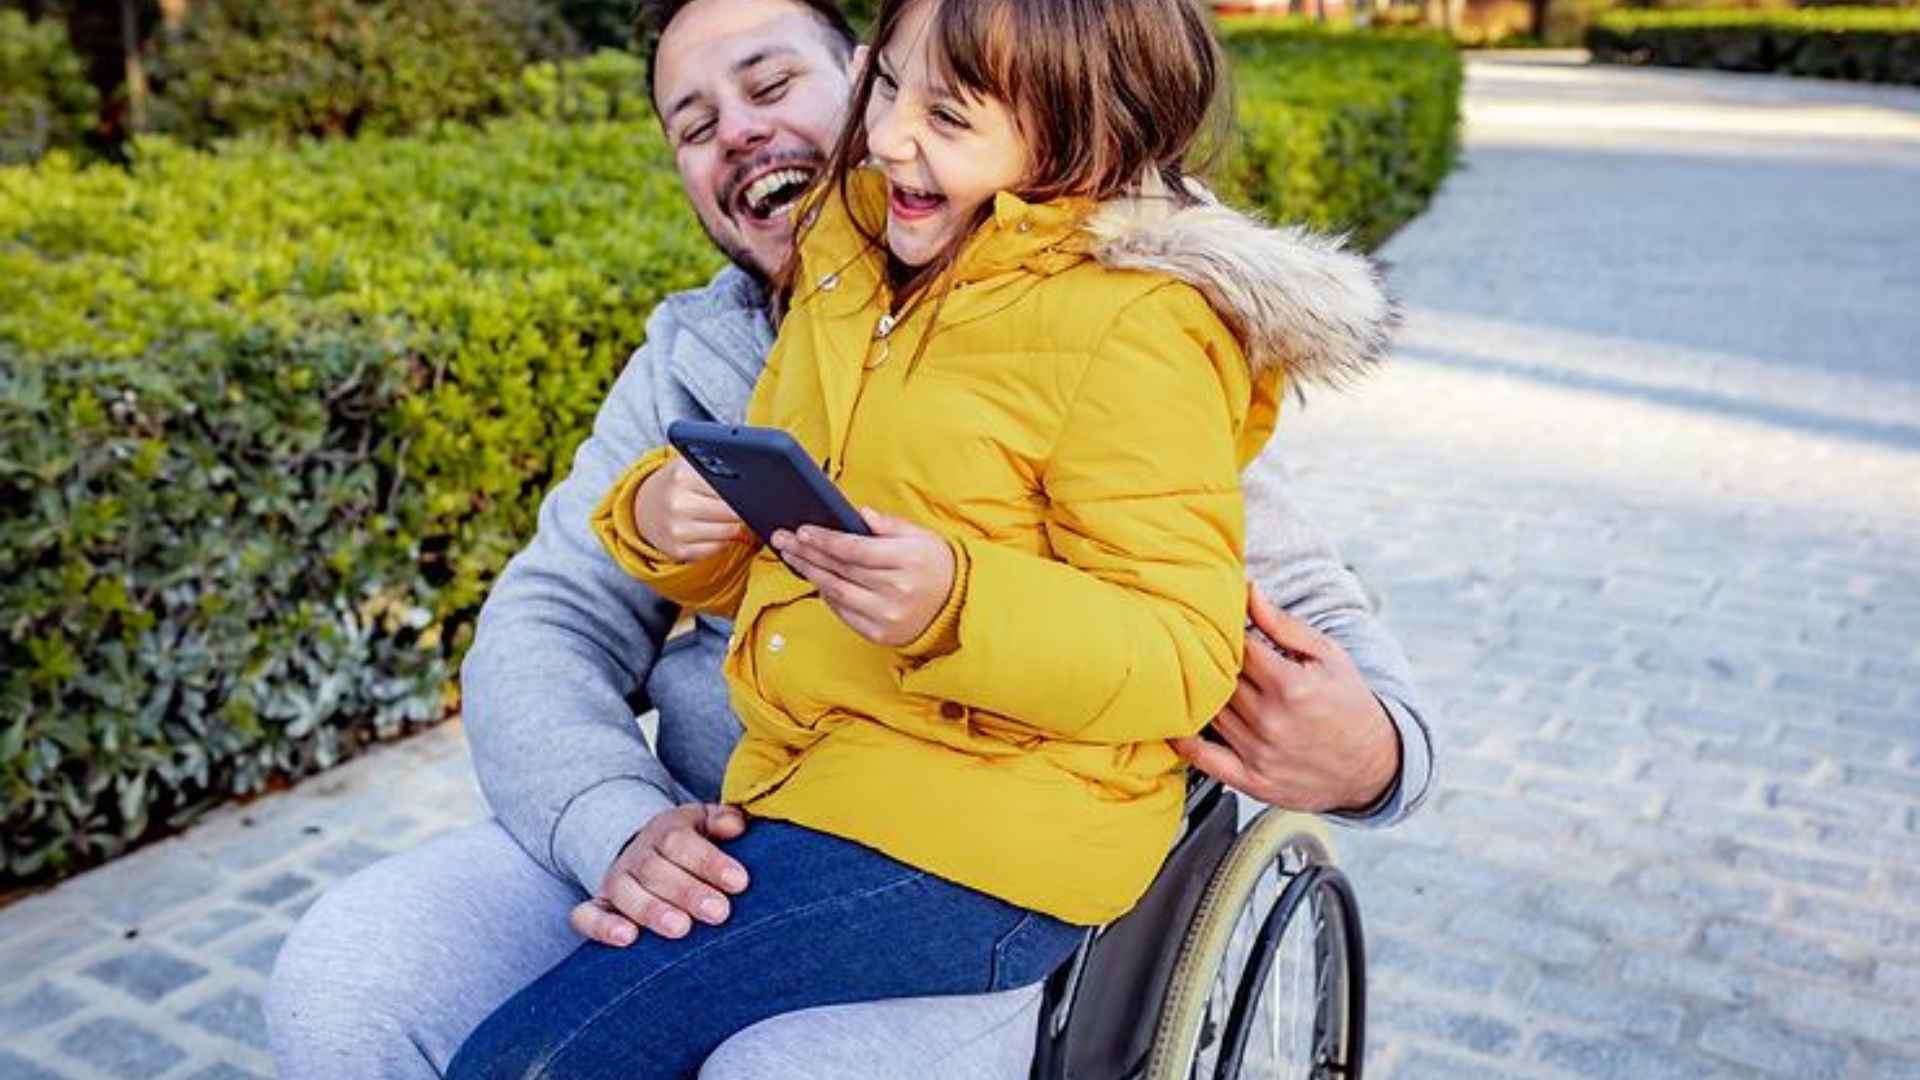 A man in a wheelchair with a young girl on his knee, both smiling